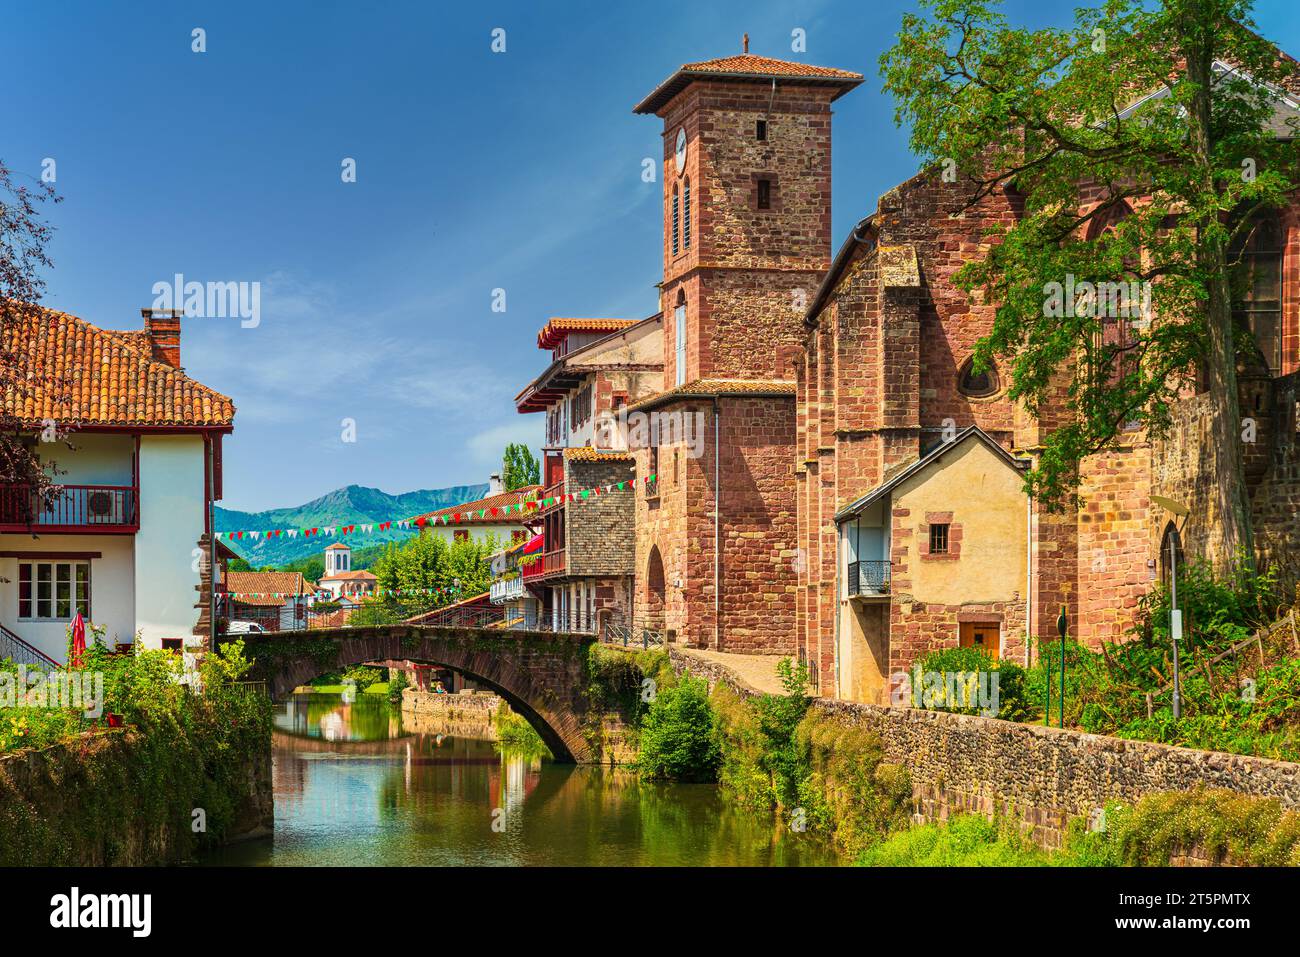 Scenic view of a picturesque French town crossed by a tranquil river. Saint-Jean-Pied-de-Port, France Stock Photo